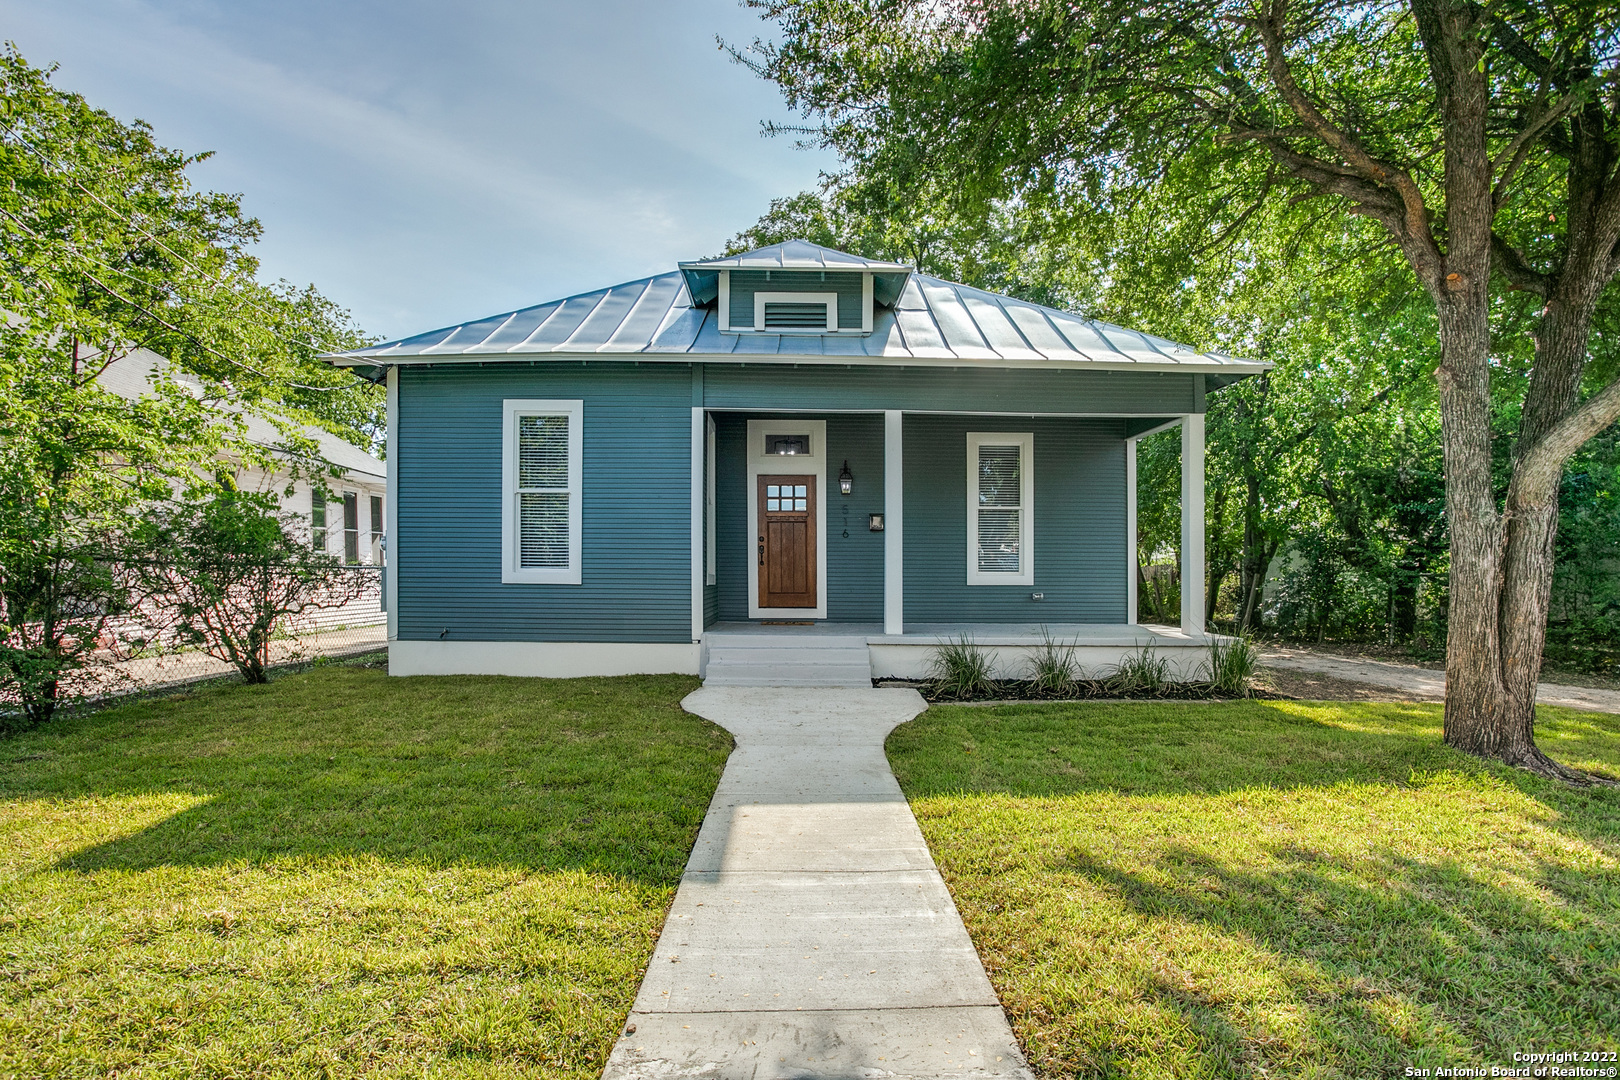 ELIGIBLE FOR UP TO $10,000 TOWARD BUYER EXPENSES.  Beautifully renovated home in the heart of Dignowity Hill.  This 3 bedroom/2 bath home has 1800 sq. ft. and huge back yard to go with it, perfect for entertaining.  This remodeled historic home has been modernized while also keeping some original characteristics such as the hardwood floors throughout all living areas and oversized custom windows.  Interior features include an open floor plan with a kitchen island, granite countertops, and dining area.  The master bath features a double vanity, stand-up shower, plus a separate garden tub. Backyard is great for entertaining and features an upgraded covered patio. Home is located within a few miles of the historic Pearl, ideal for anyone looking to explore downtown's popular food and entertainment venues. This home is ready for anyone looking to indulge in San Antonio's thriving downtown scene.